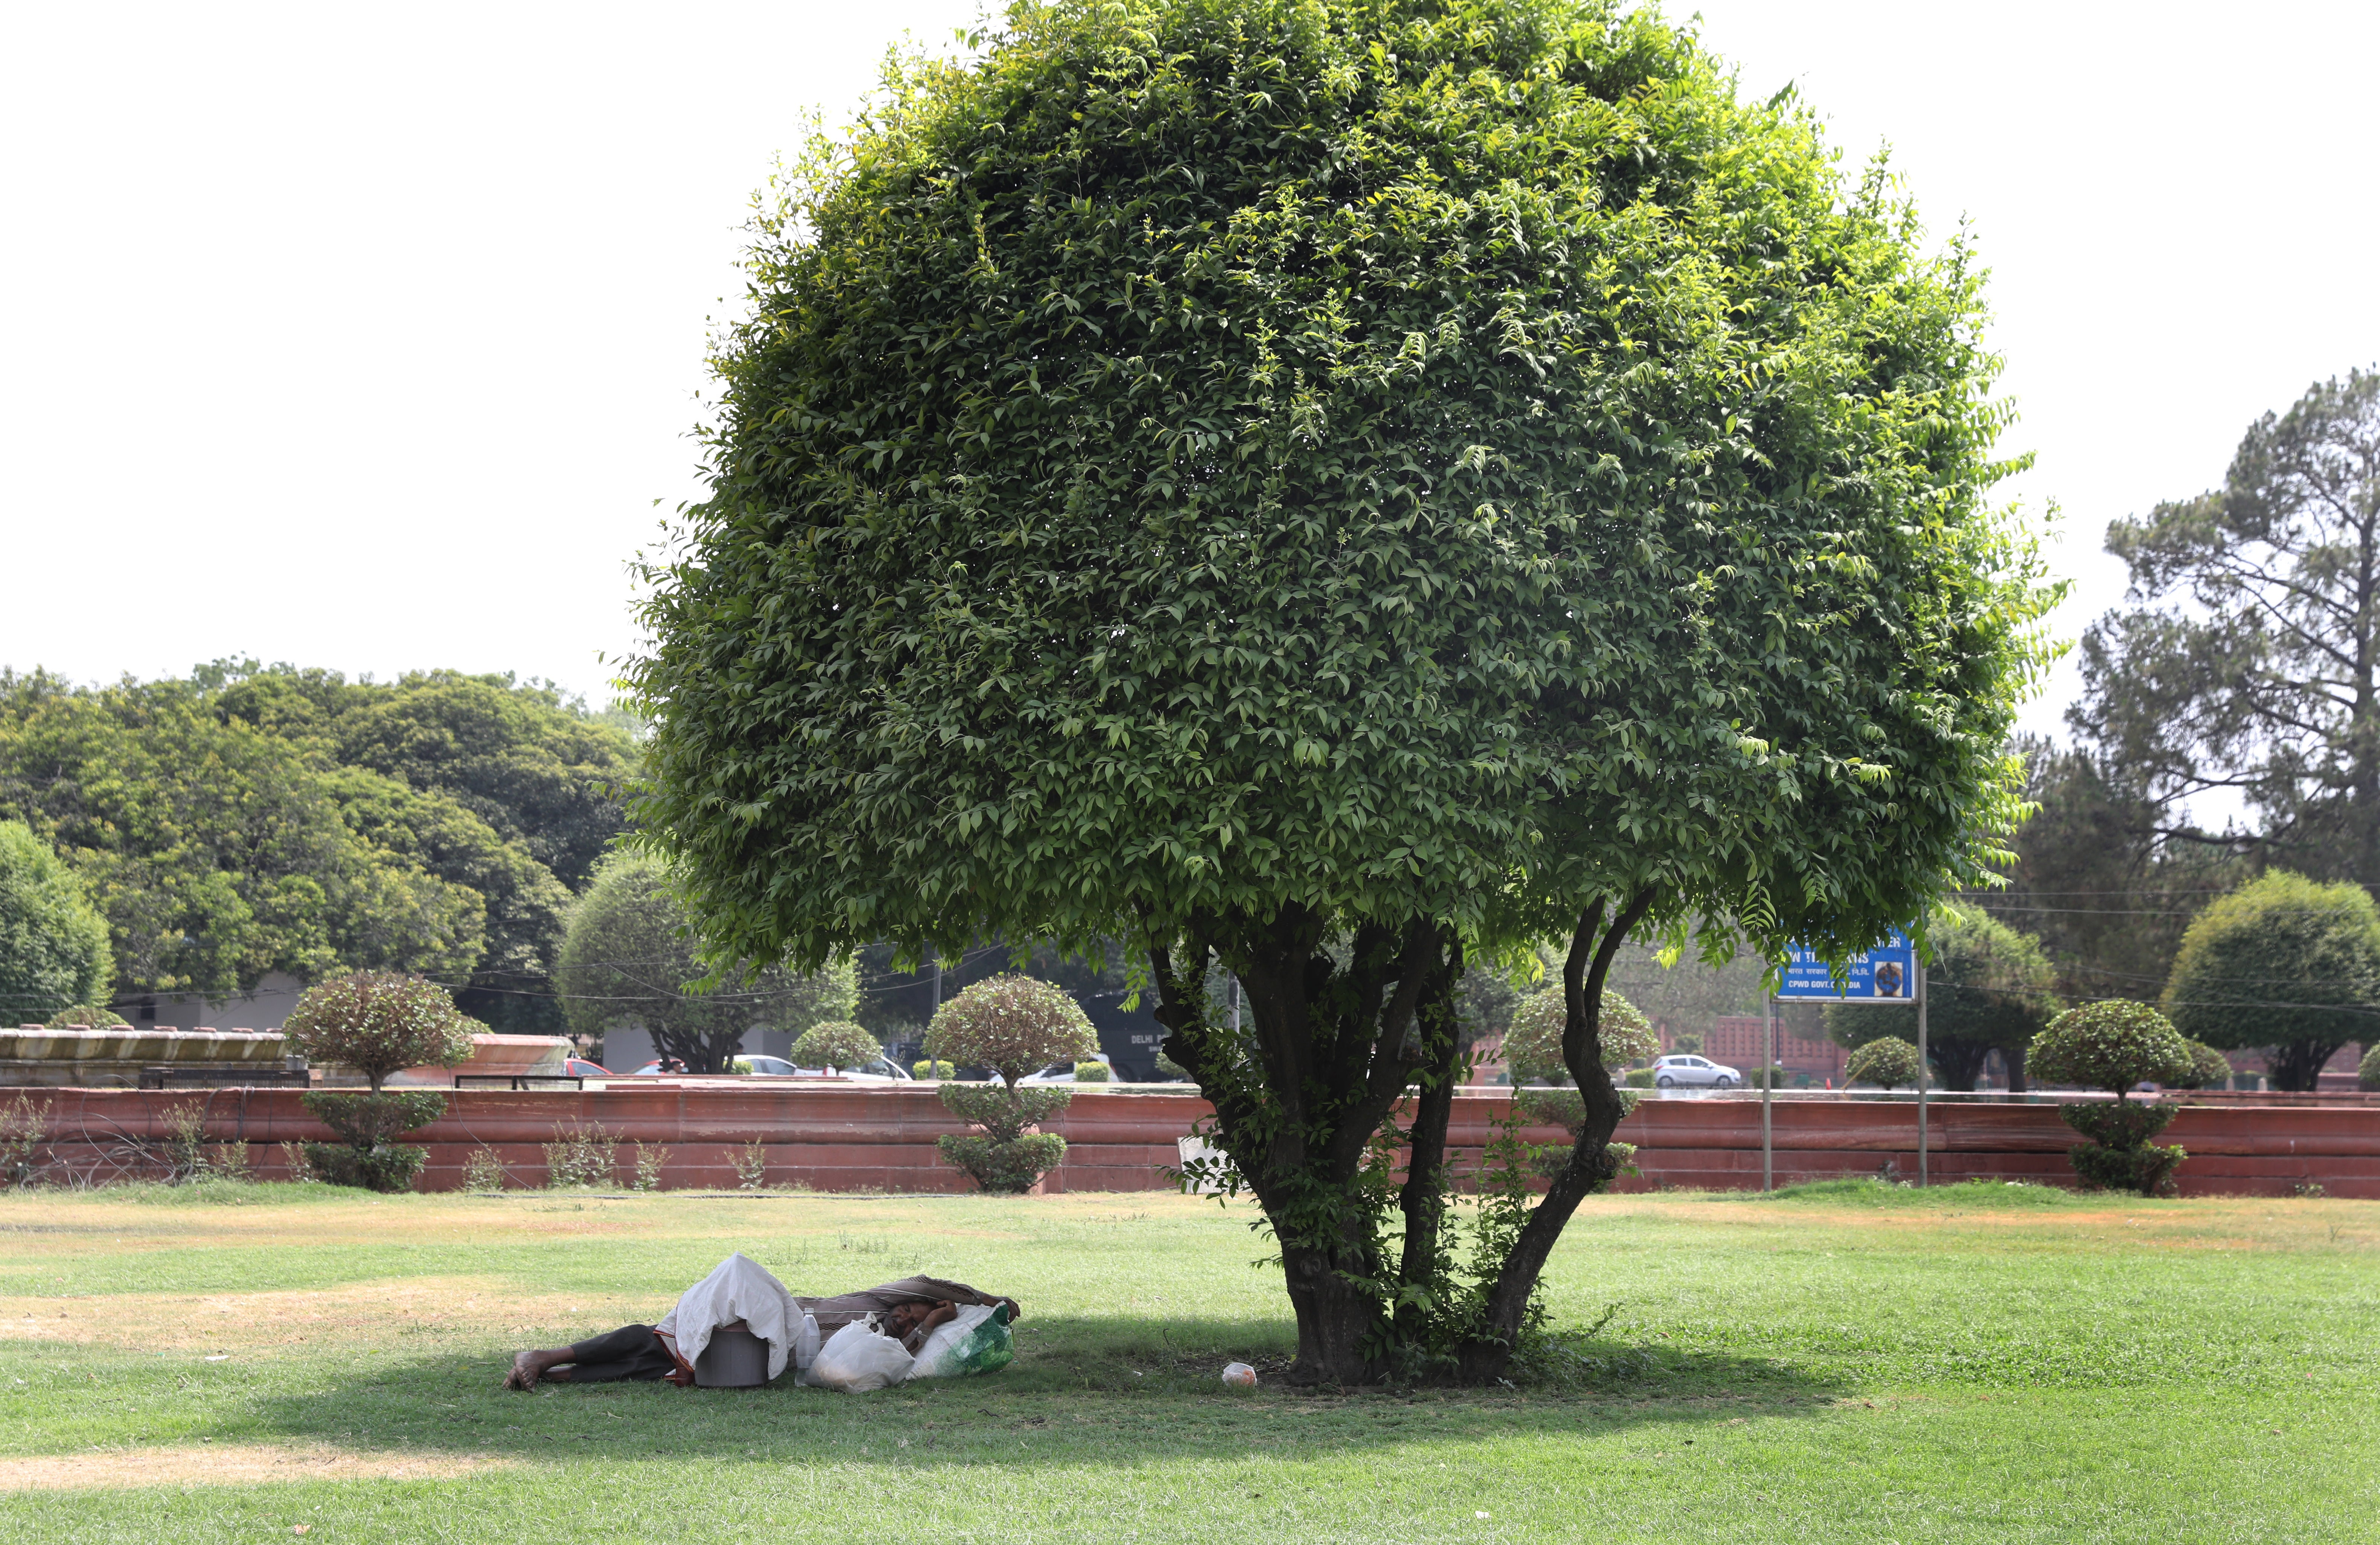 An Indian man takes a nap under the shade of a tree as the temperature rises in New Delhi, 28 April 2022